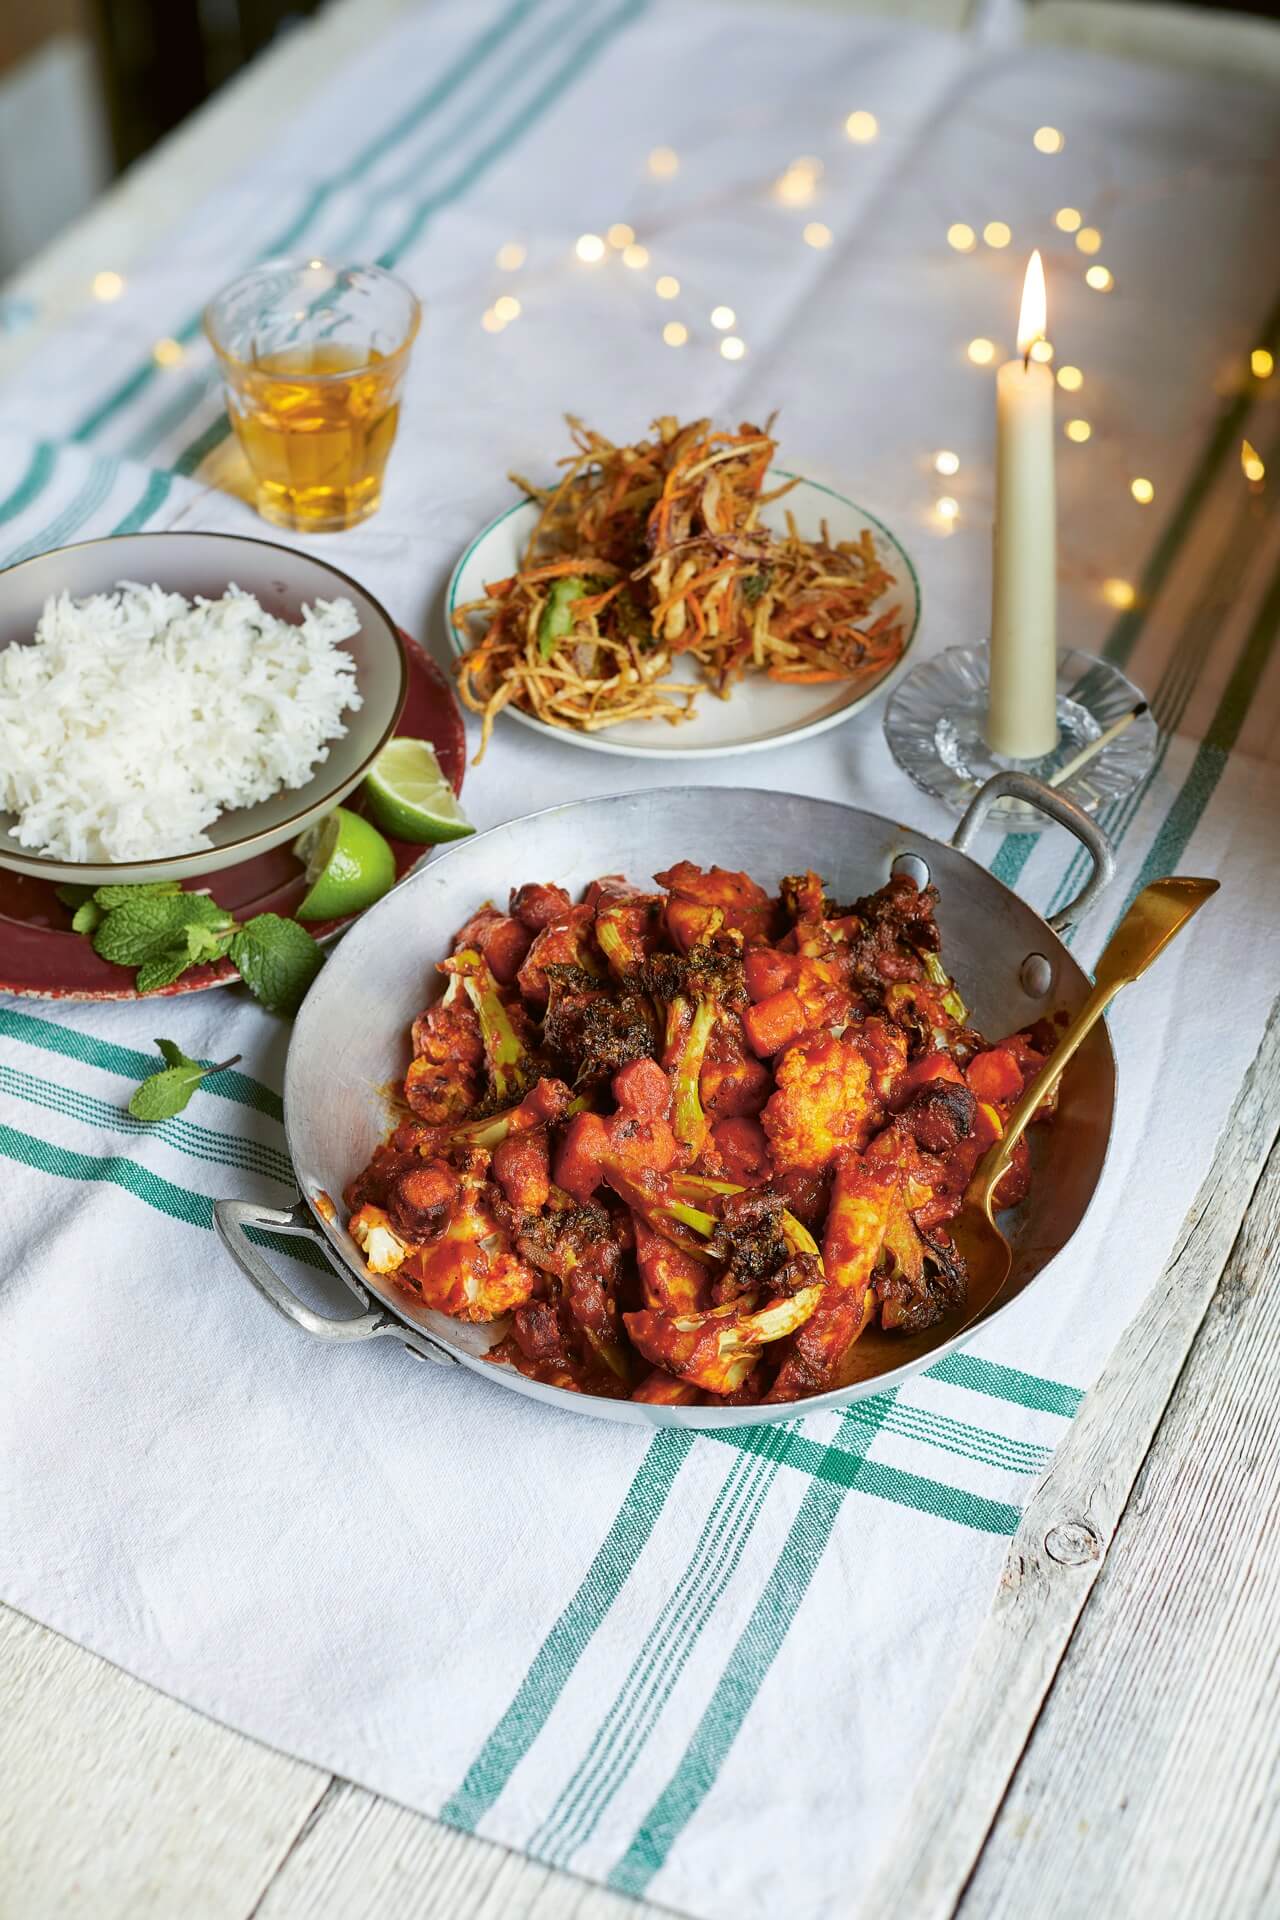 Boxing Day balti recipe from Easy Vegan Christmas by Katy Beskow